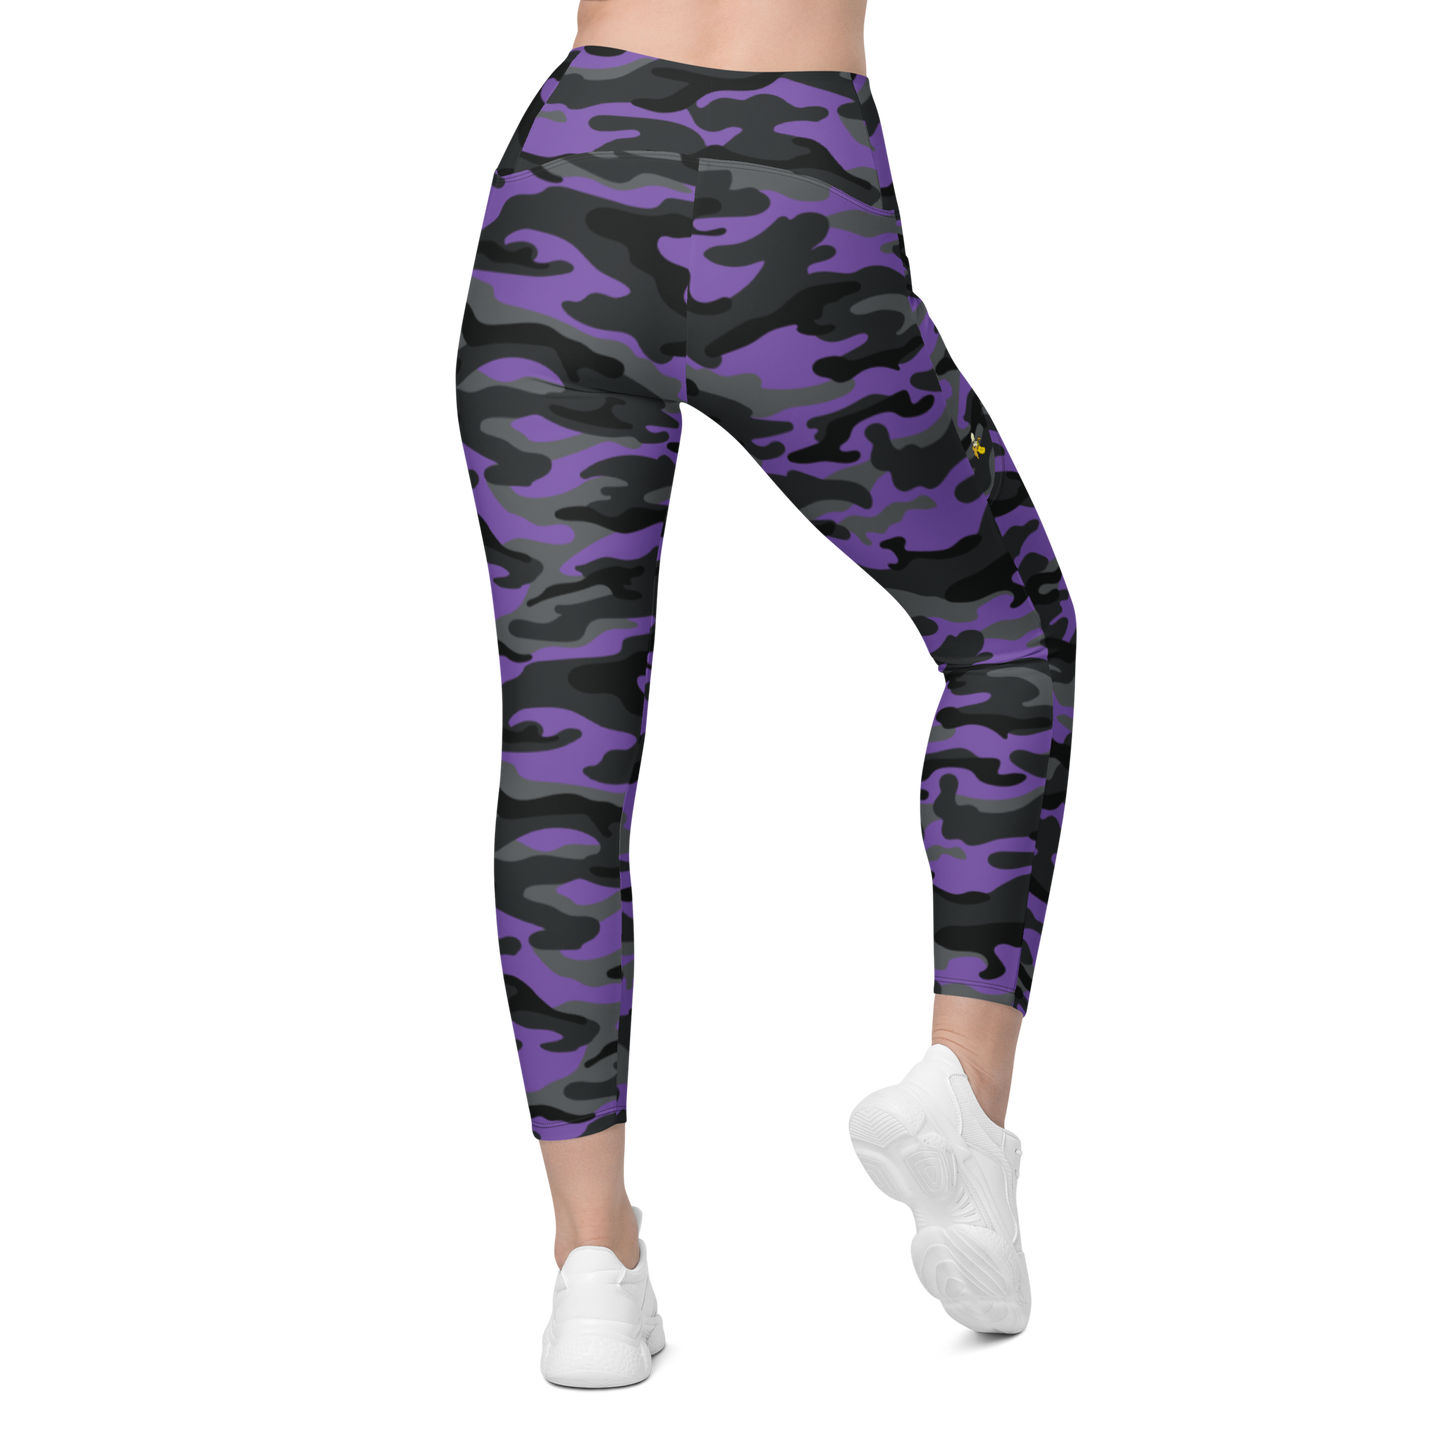 Camo Crossover leggings with pockets